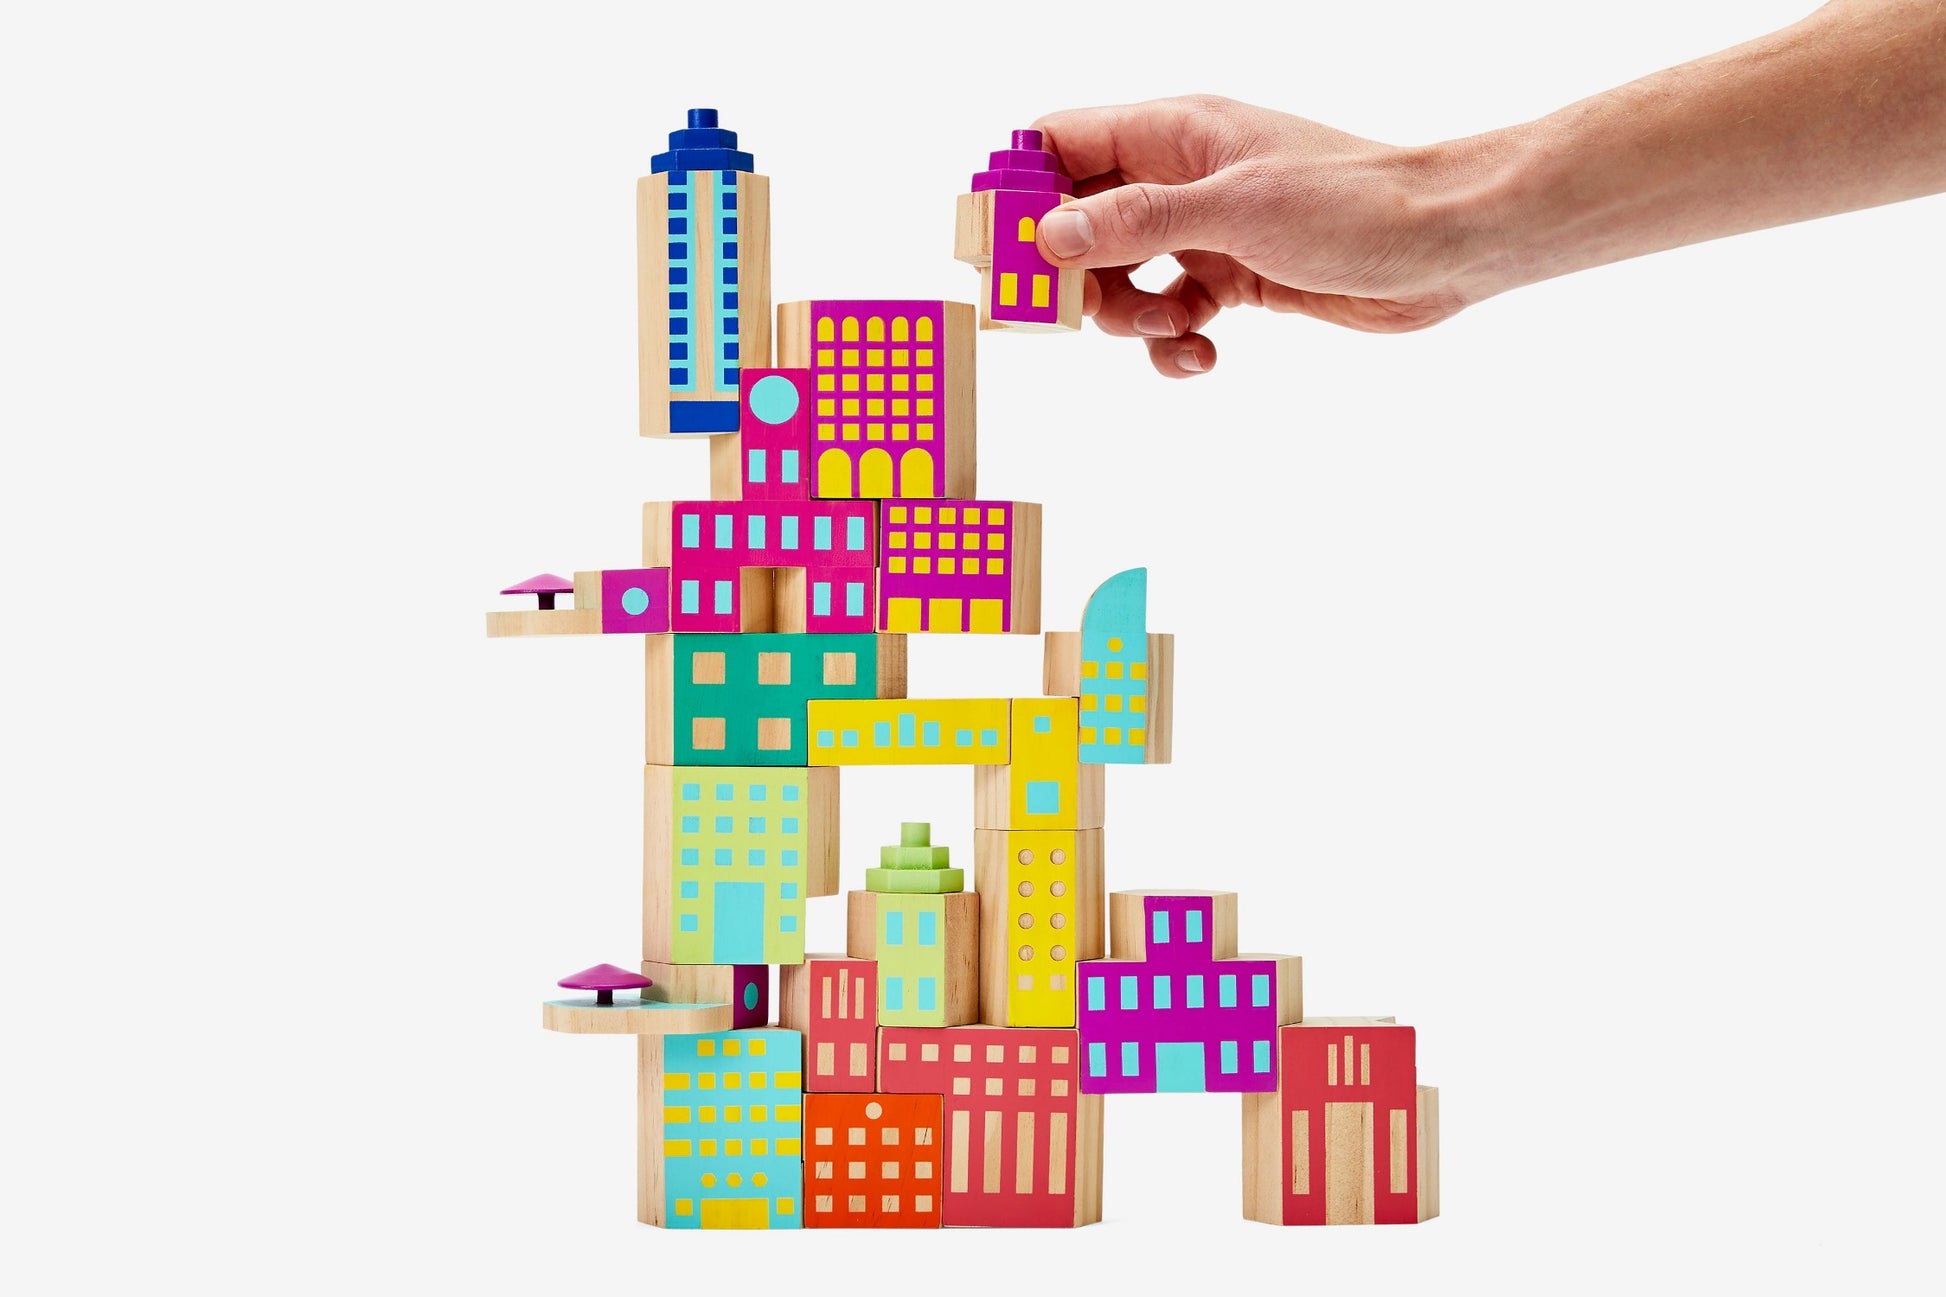 Colourful building blocks in various shapes and sizes painted to look like buildings.